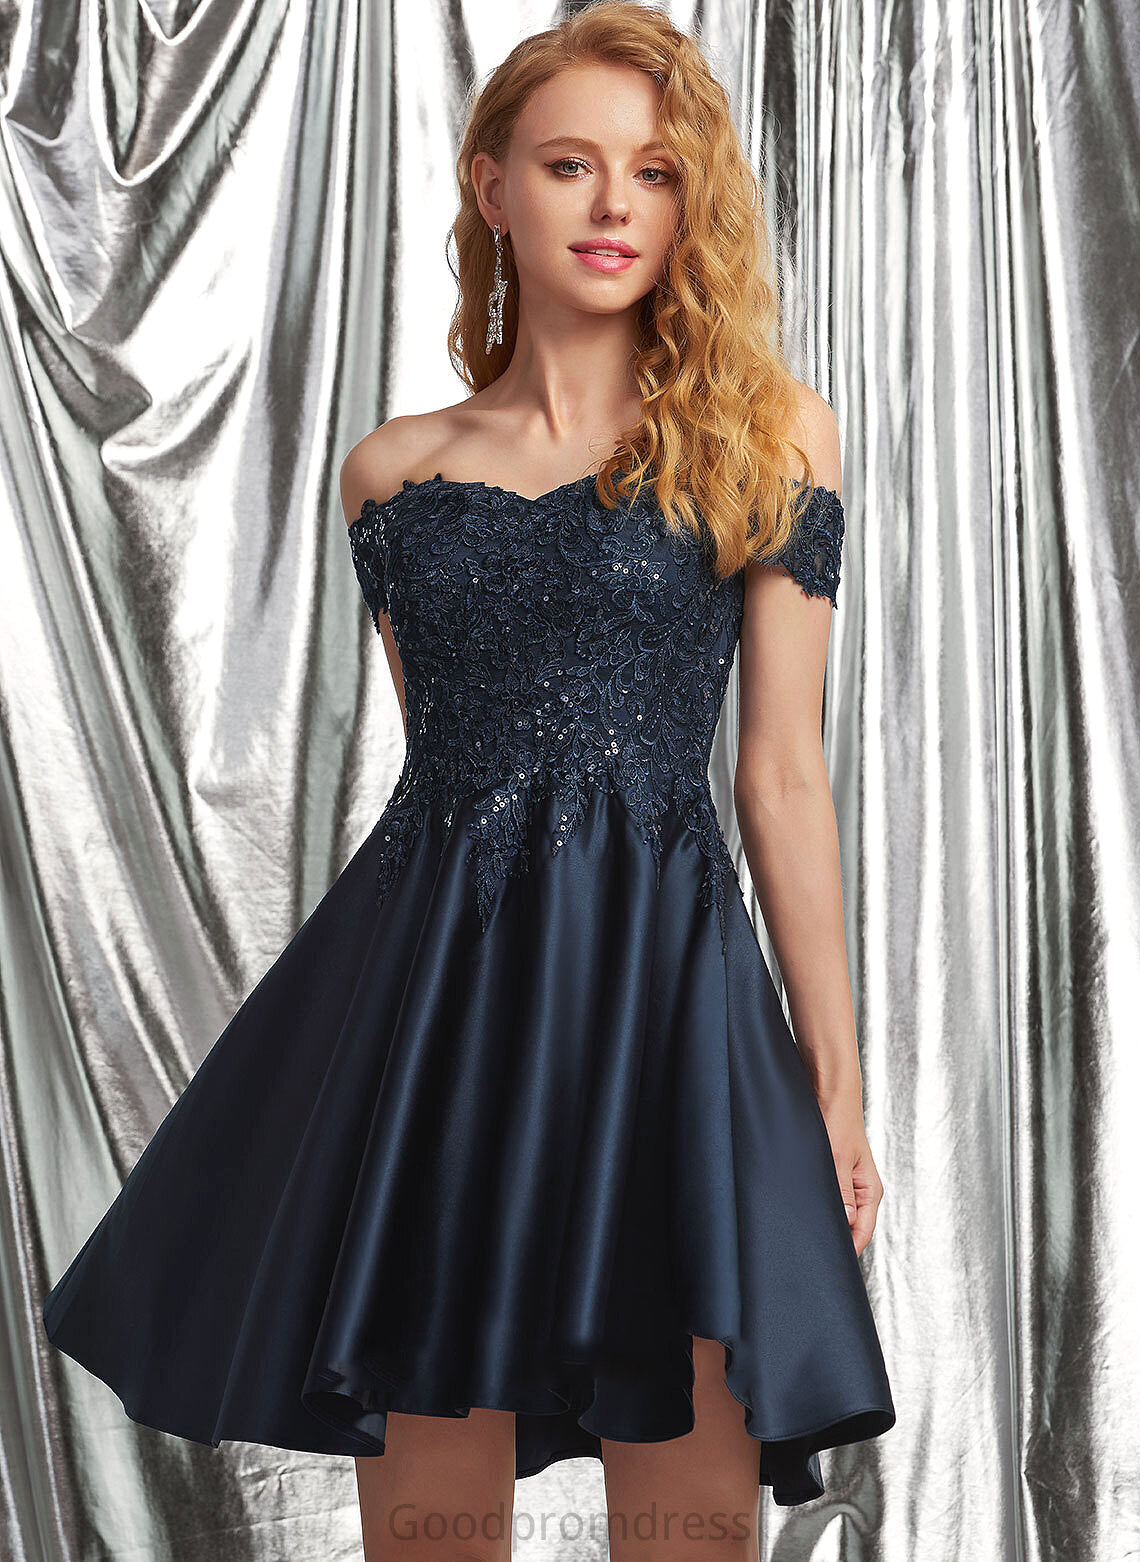 With Homecoming Kate A-Line Satin Lace Homecoming Dresses Off-the-Shoulder Short/Mini Dress